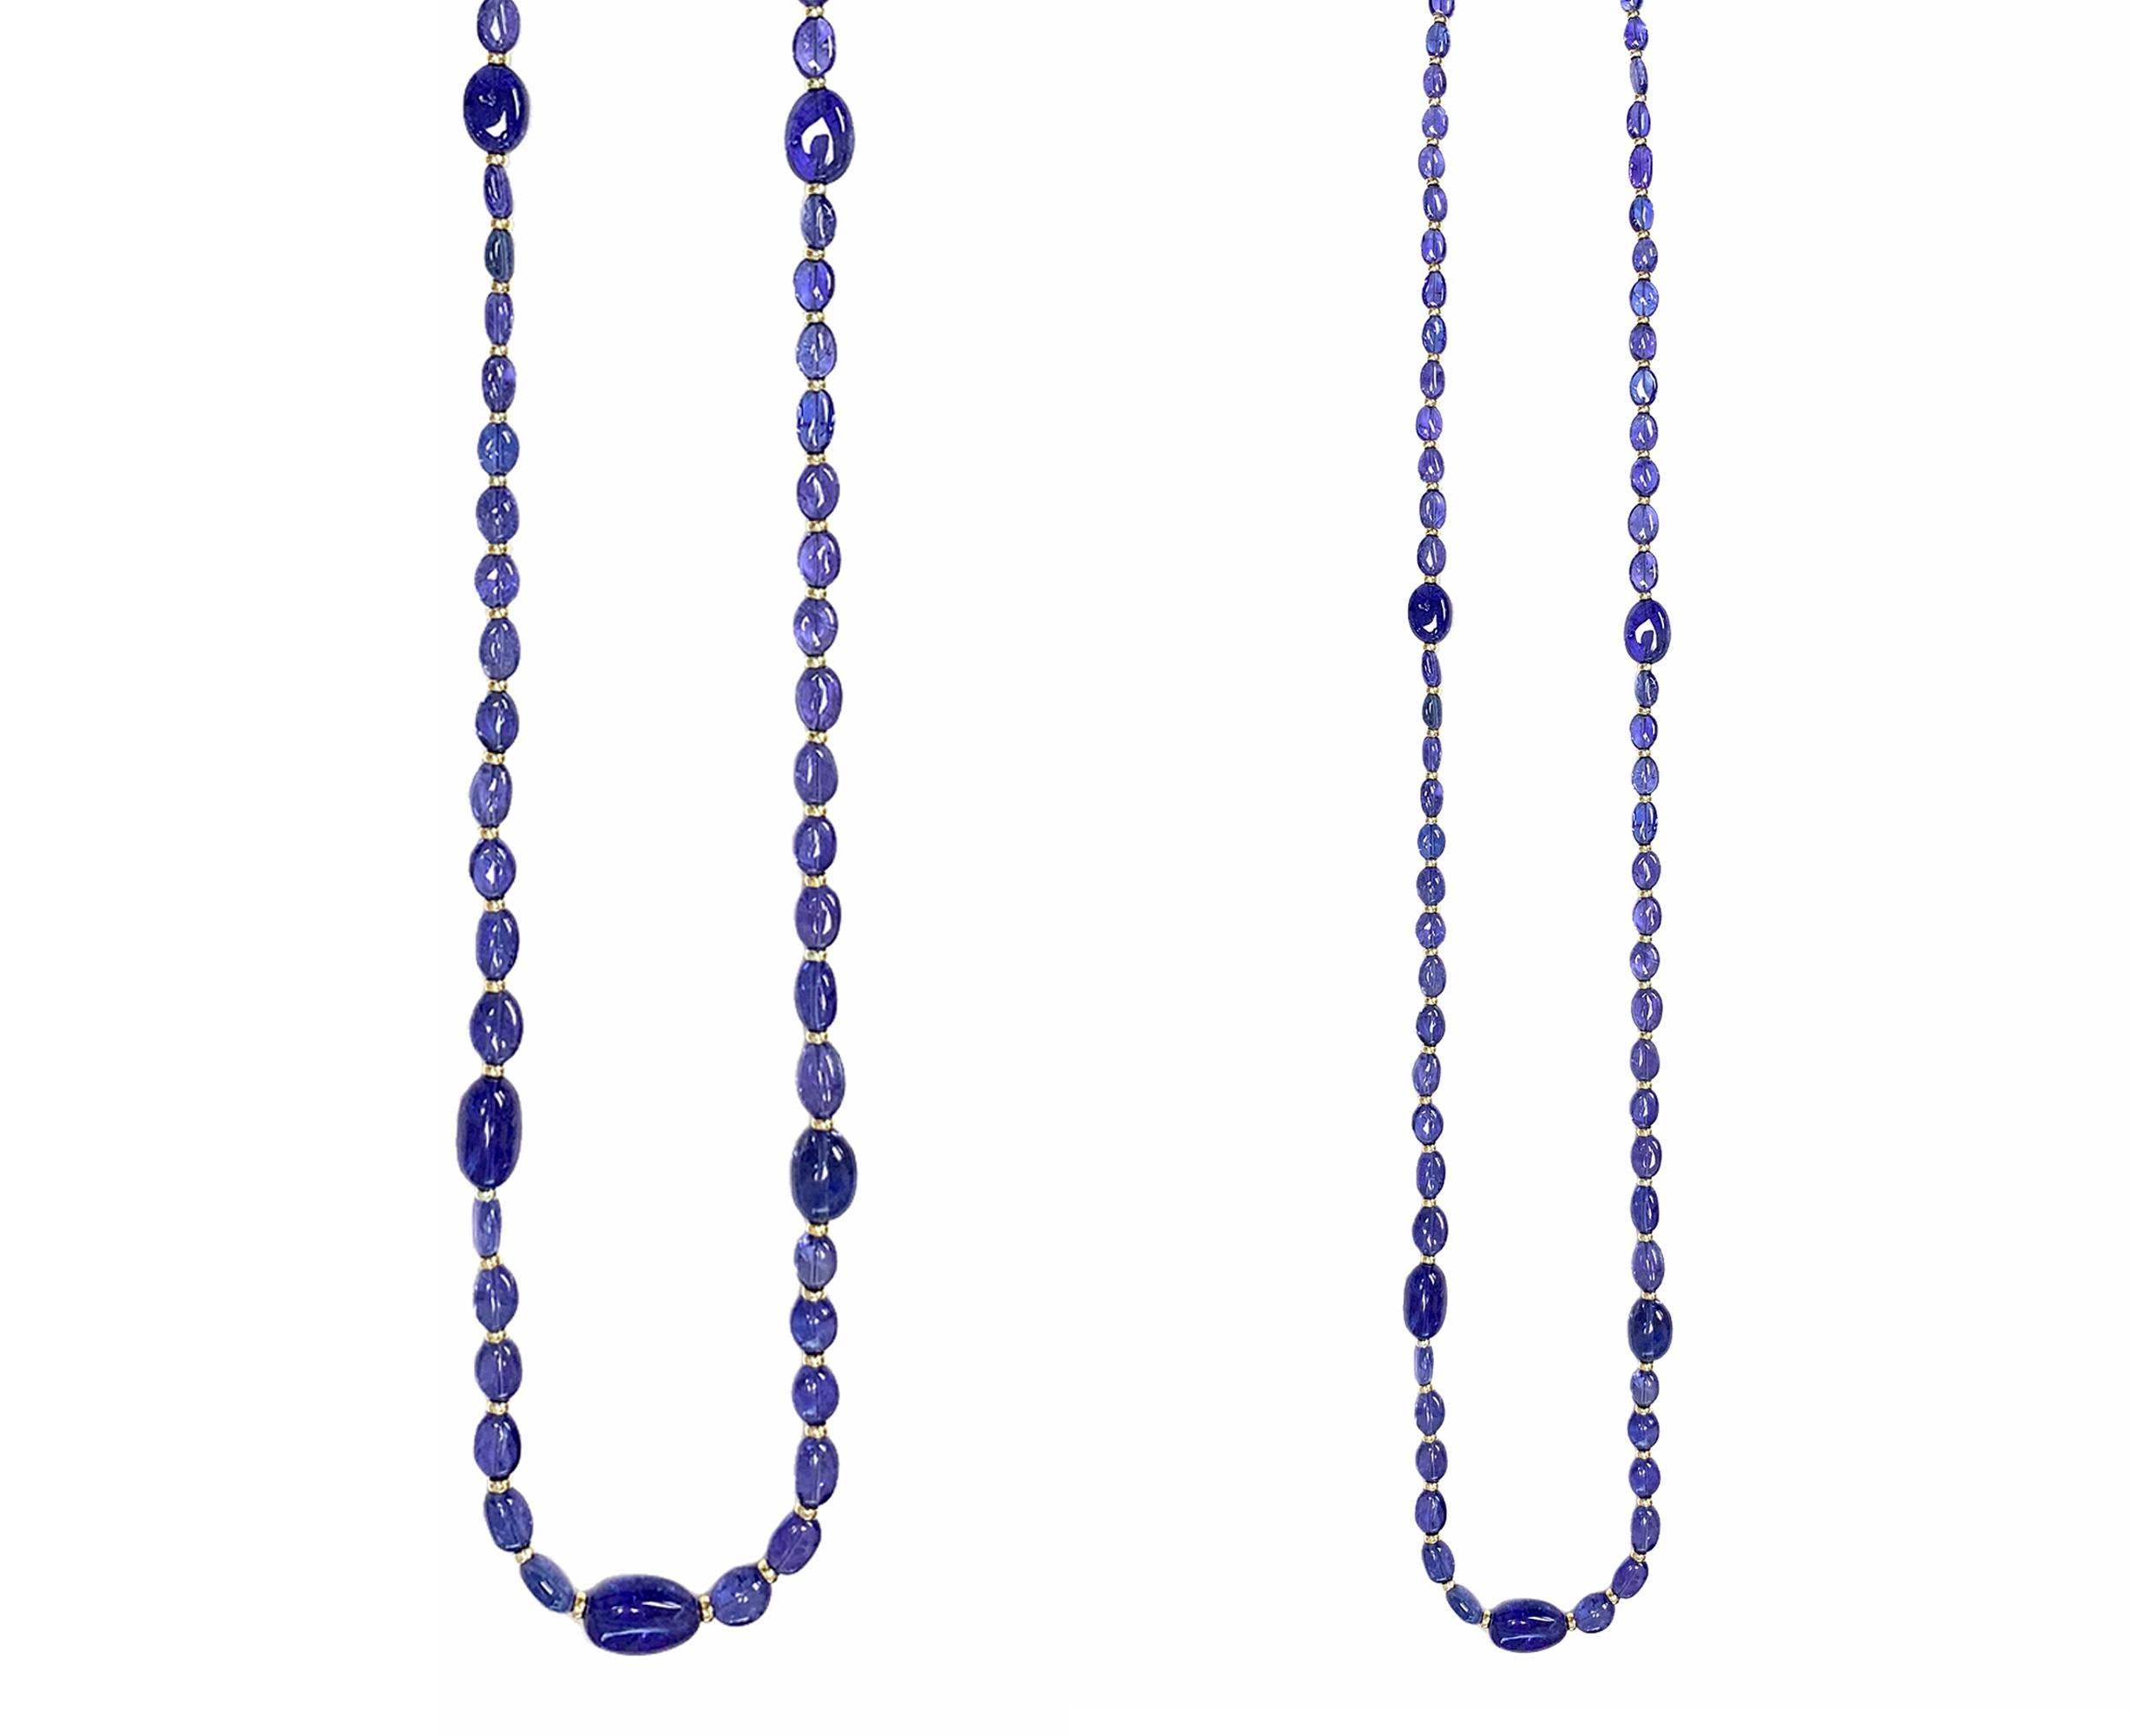 1 Strand Large and Small Tanzanite Tumbled Bead Necklace in 18k Yellow Gold, from 'G-one' Collection

Gemstone Weight: 320 Carats